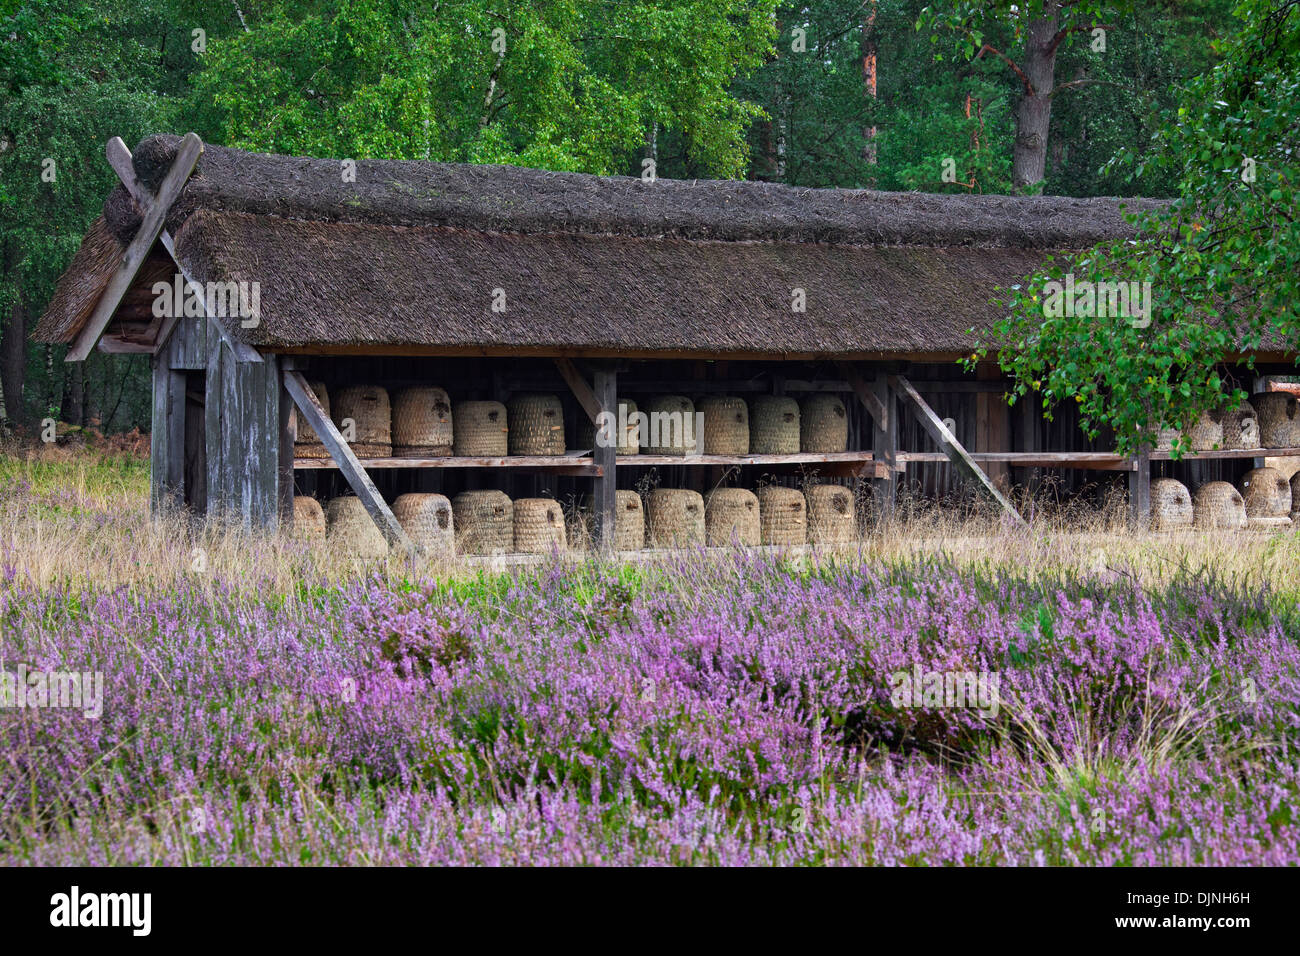 Bee hives / beehives / skeps for honeybees in shelter of apiary in the Lüneburg Heath / Lunenburg Heathland, Saxony, Germany Stock Photo